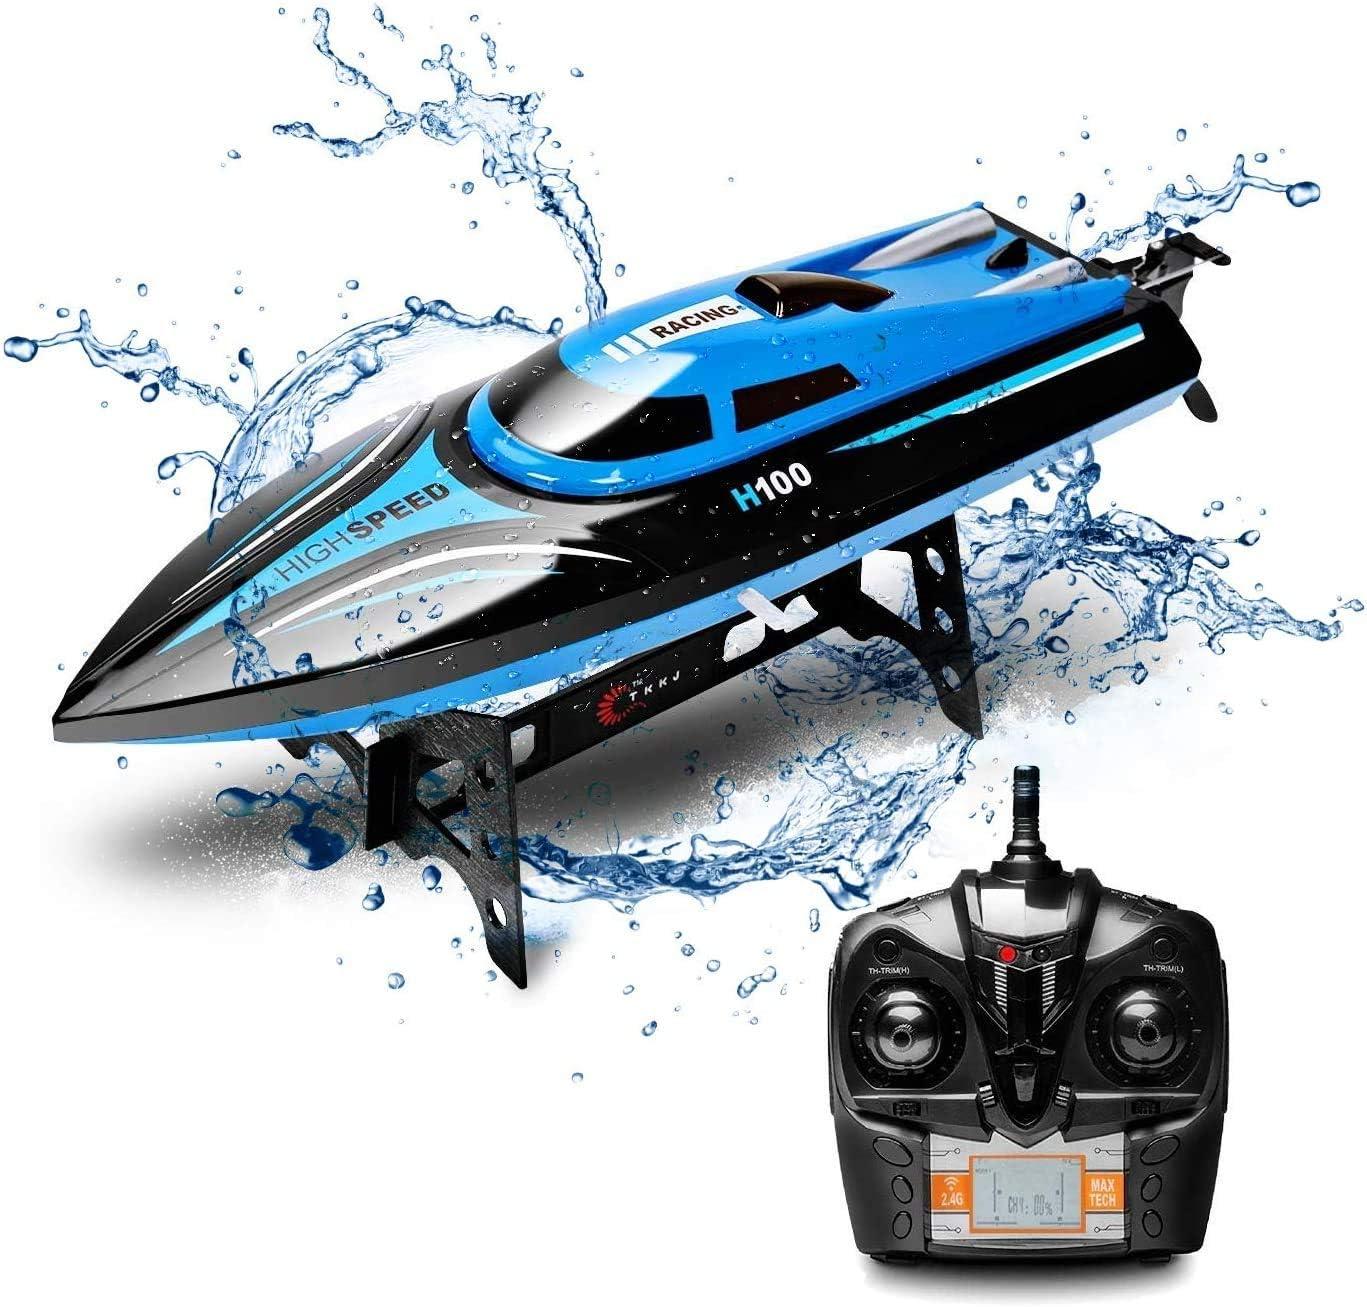 Blomiky H100 Rc Boat: The Impressive Features and Drawbacks of the Blomiky H100 RC Boat